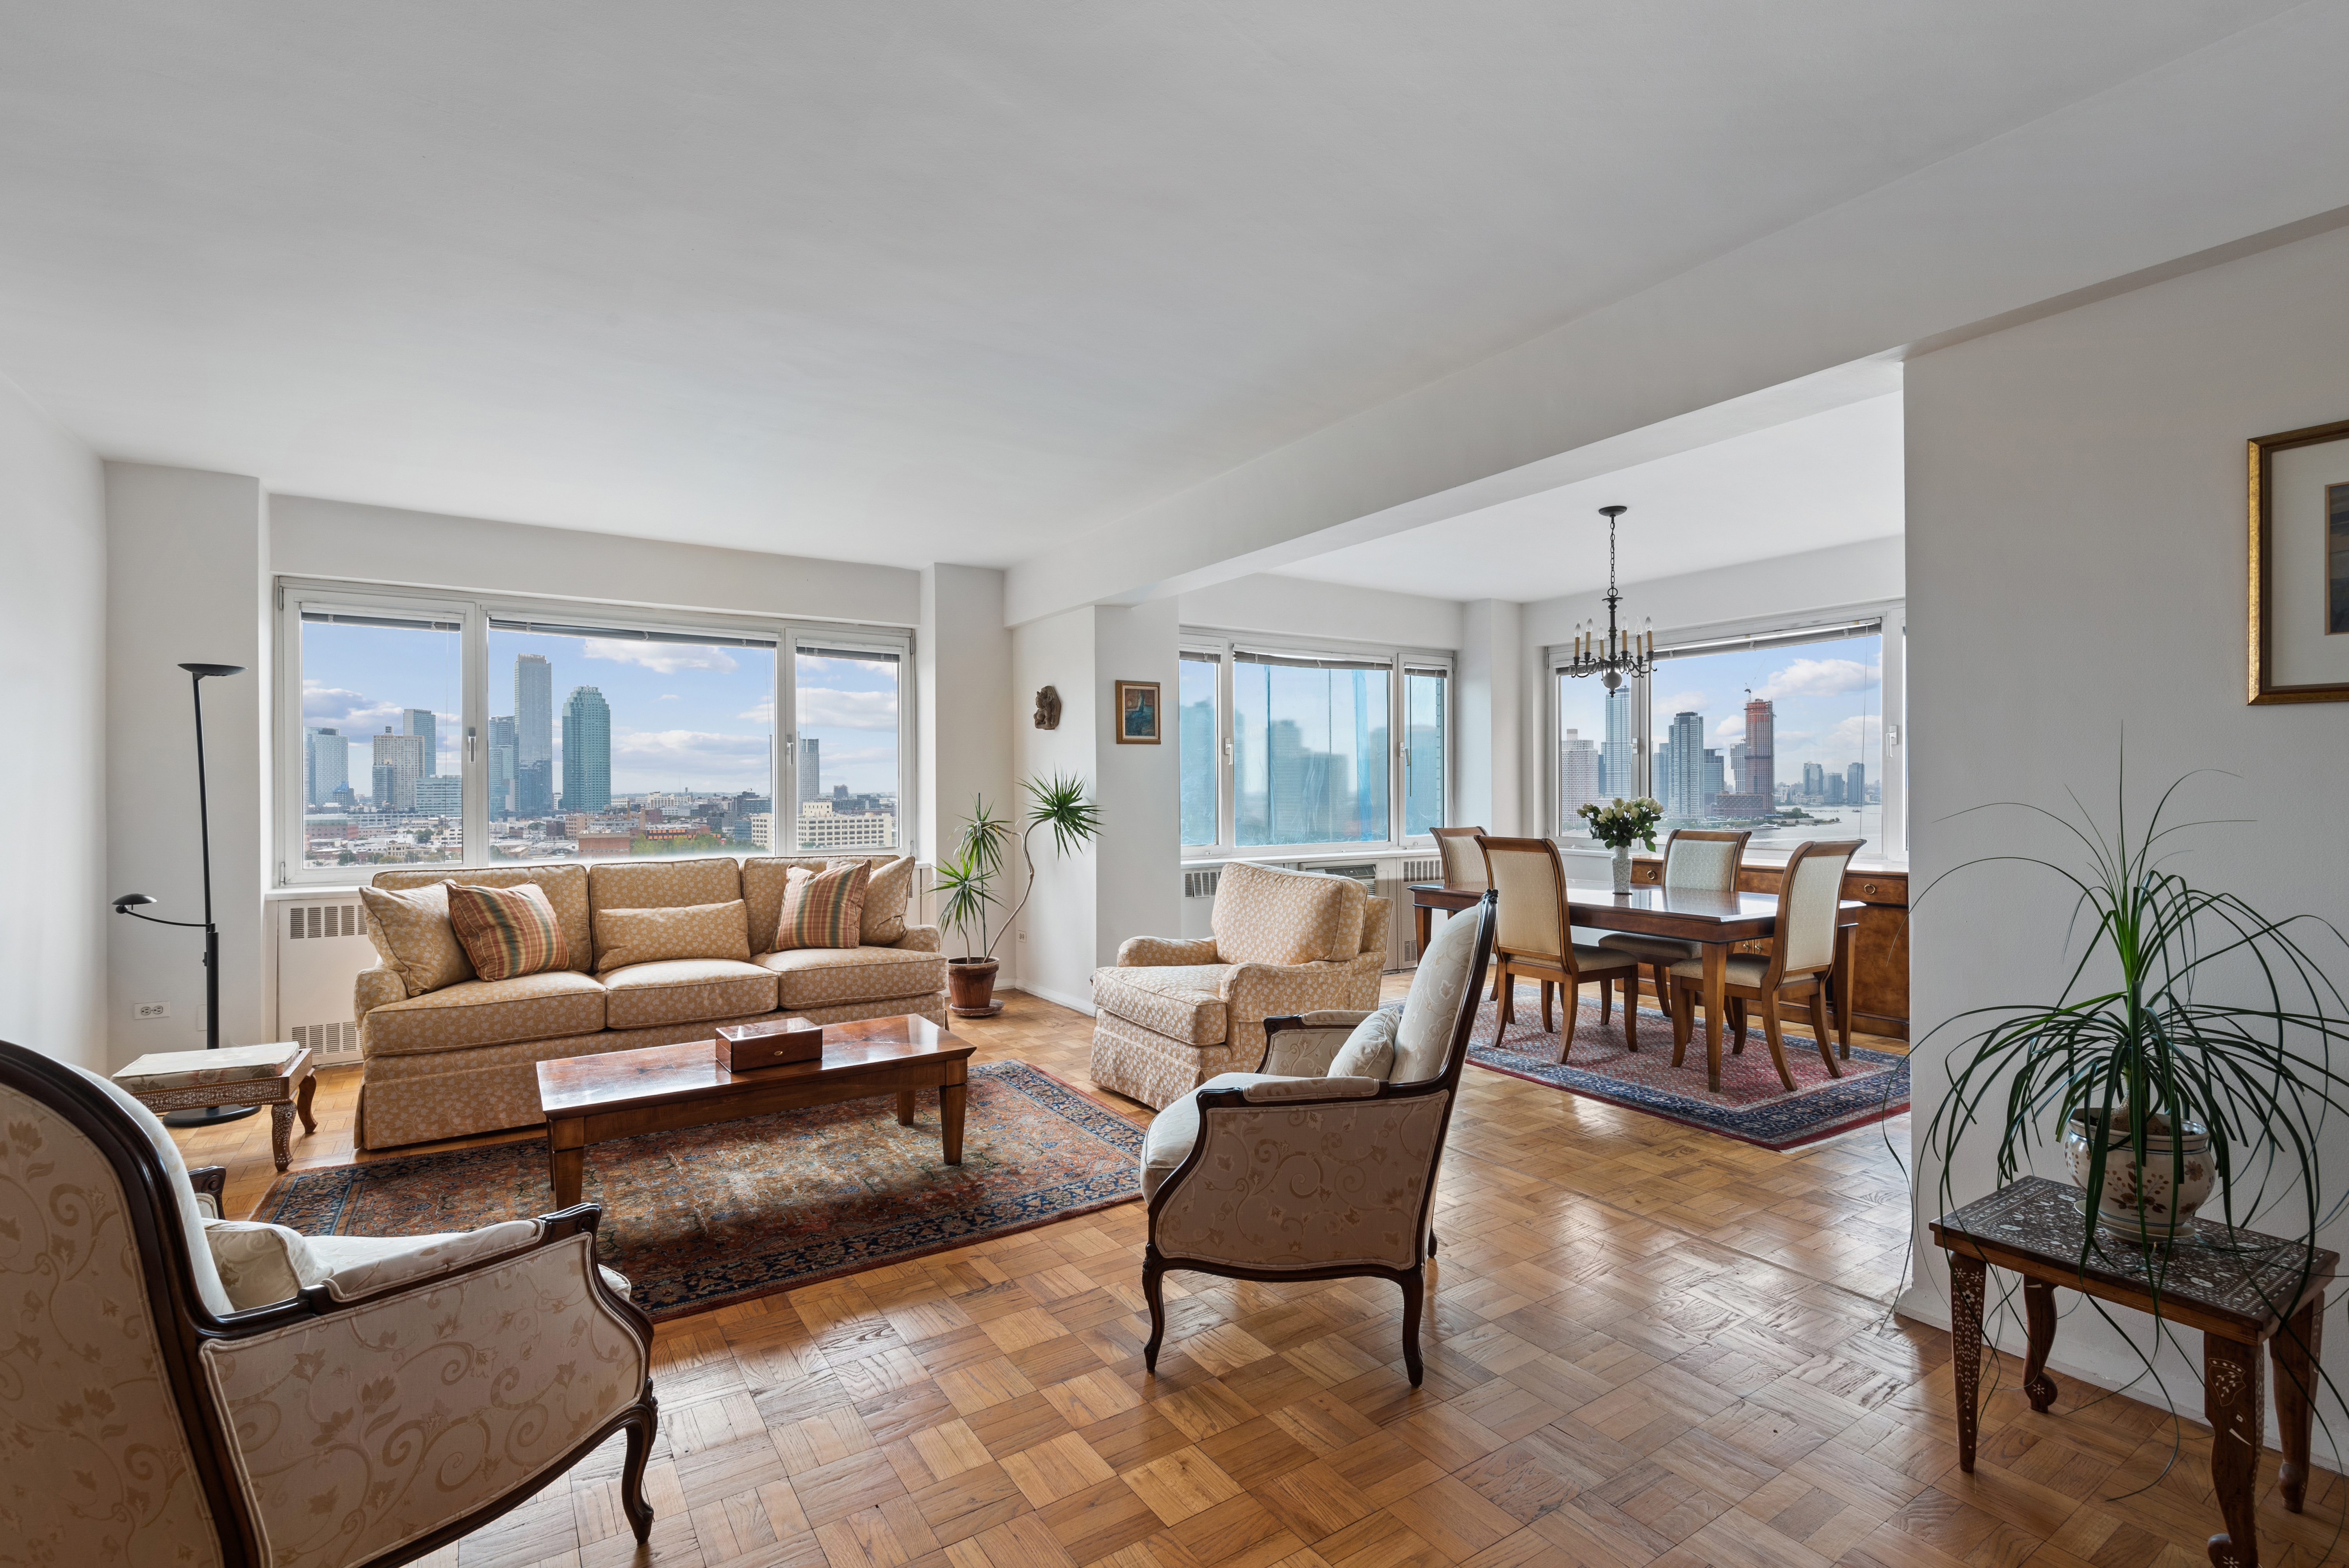 45 Sutton Place South Sutton Place New York NY 10022